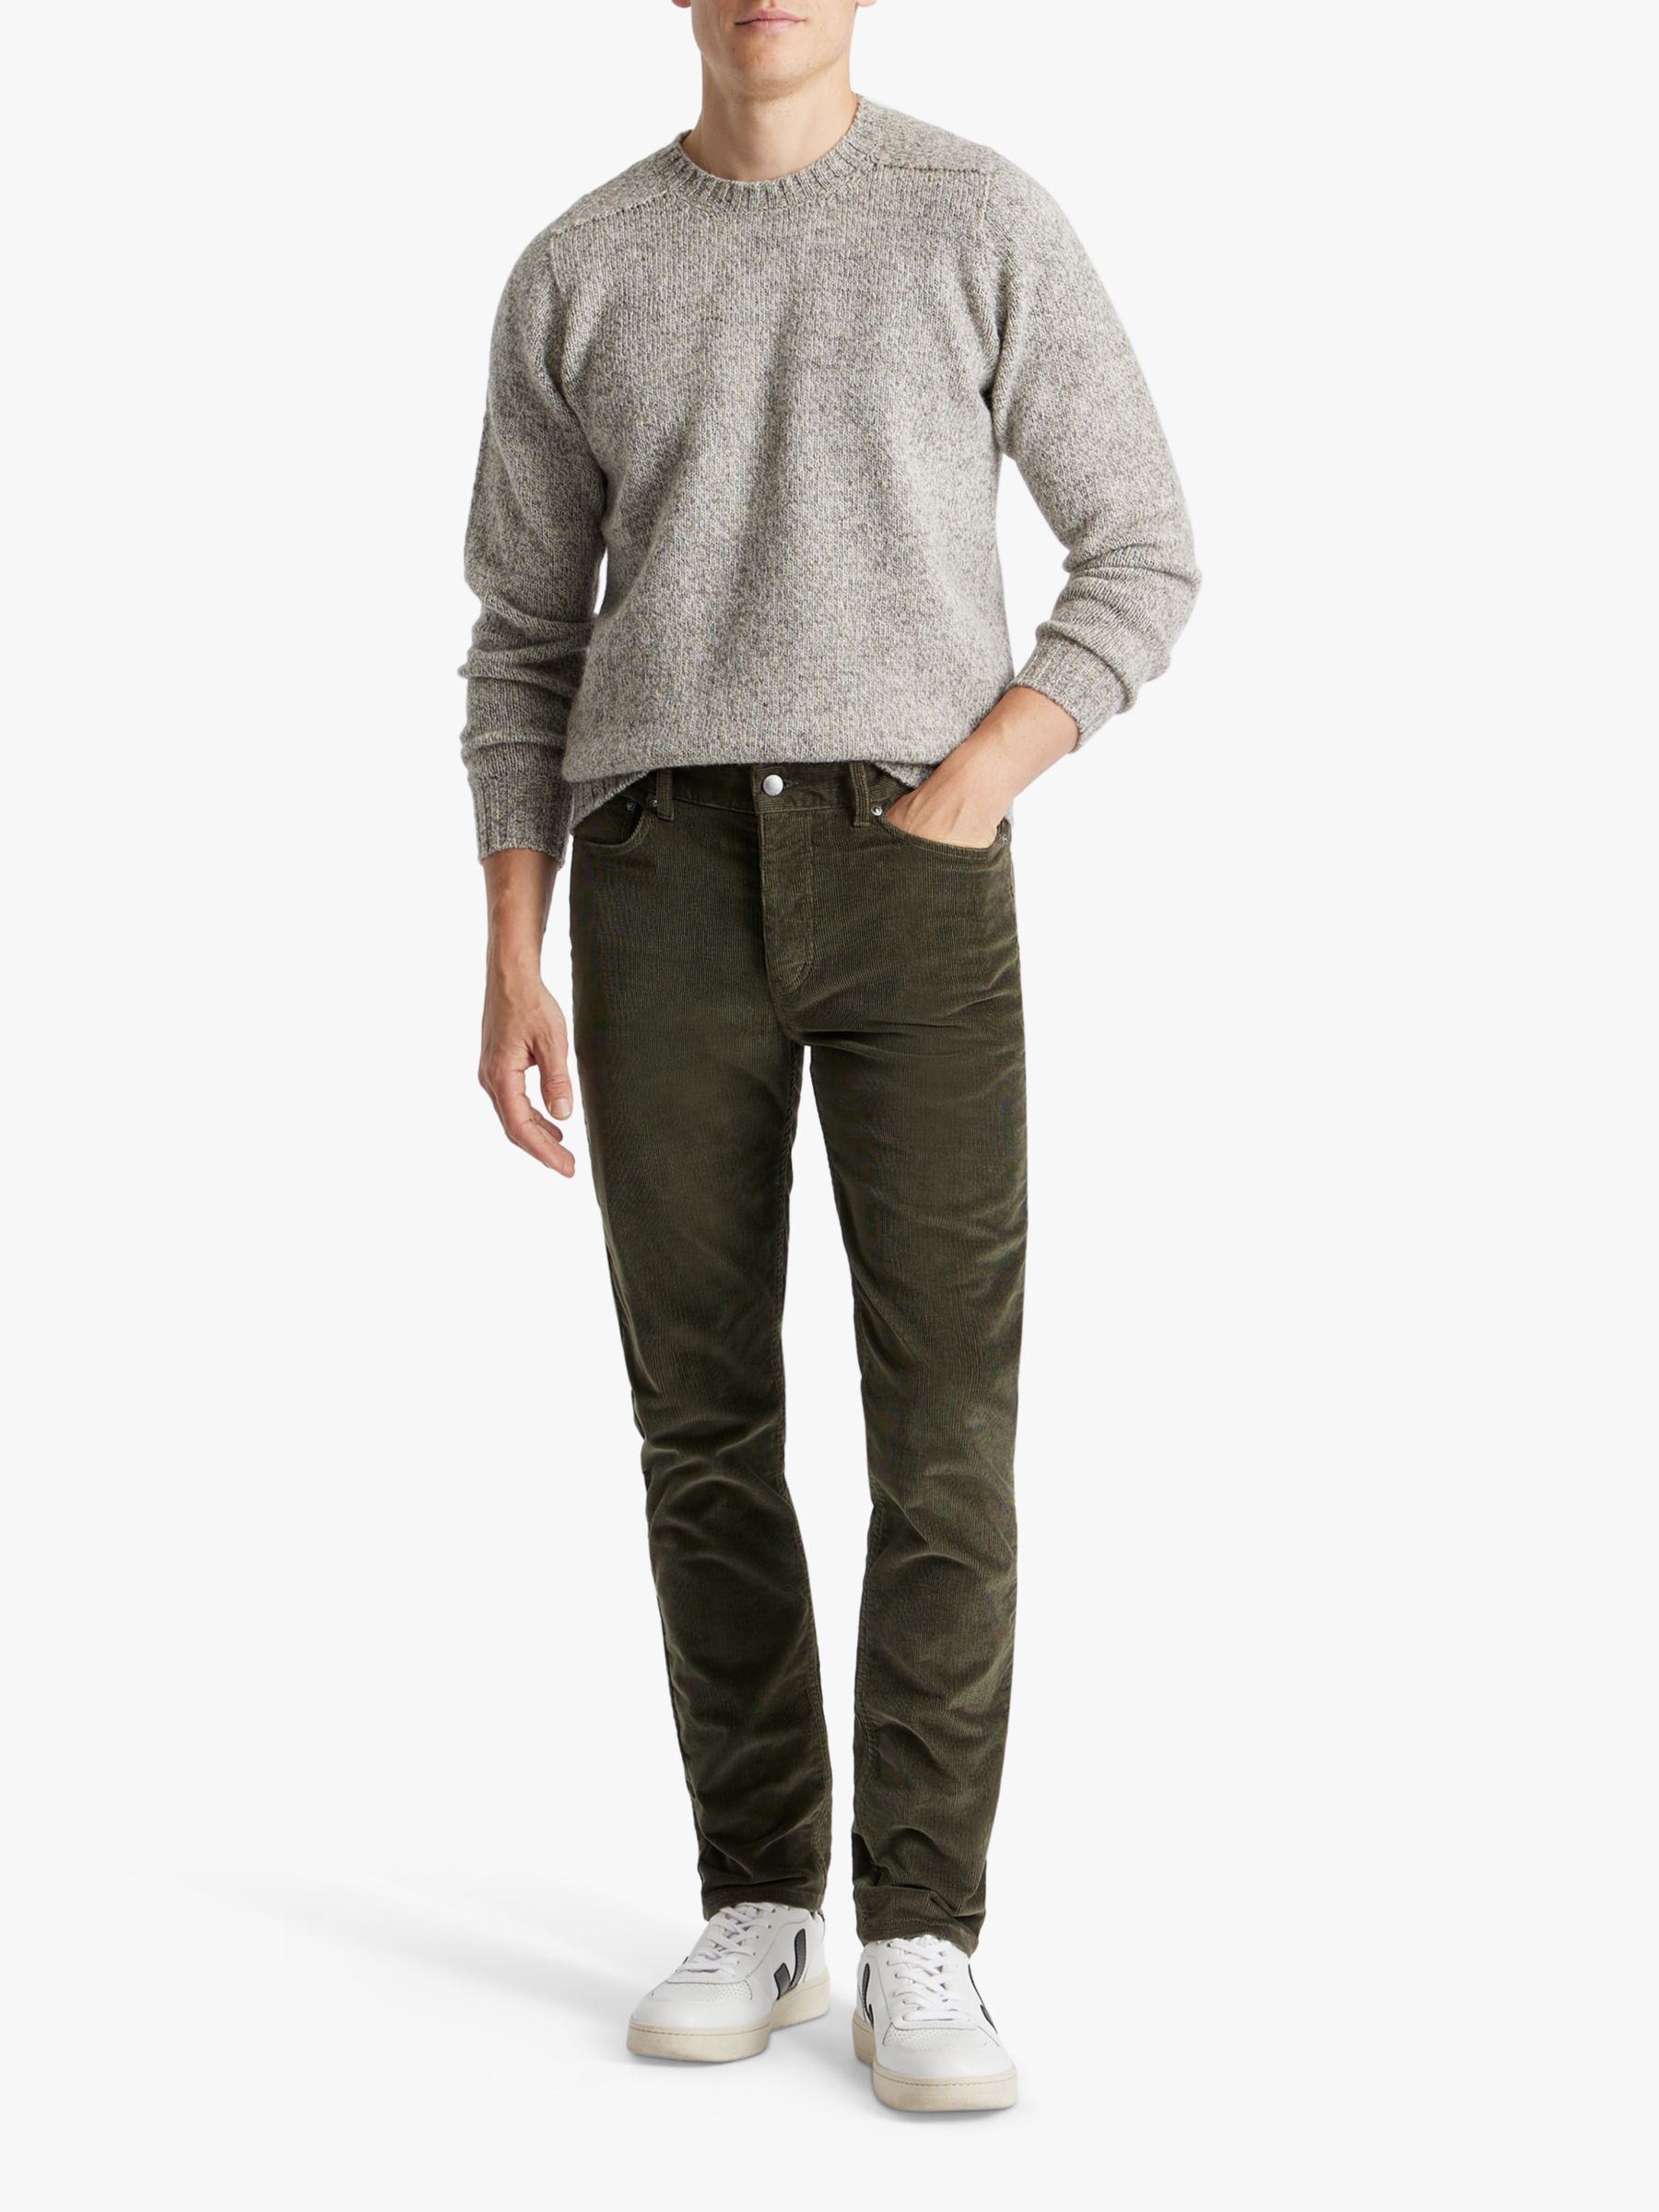 SPOKE Corduroy Fives Broad Thigh Trousers, Ivy at John Lewis & Partners